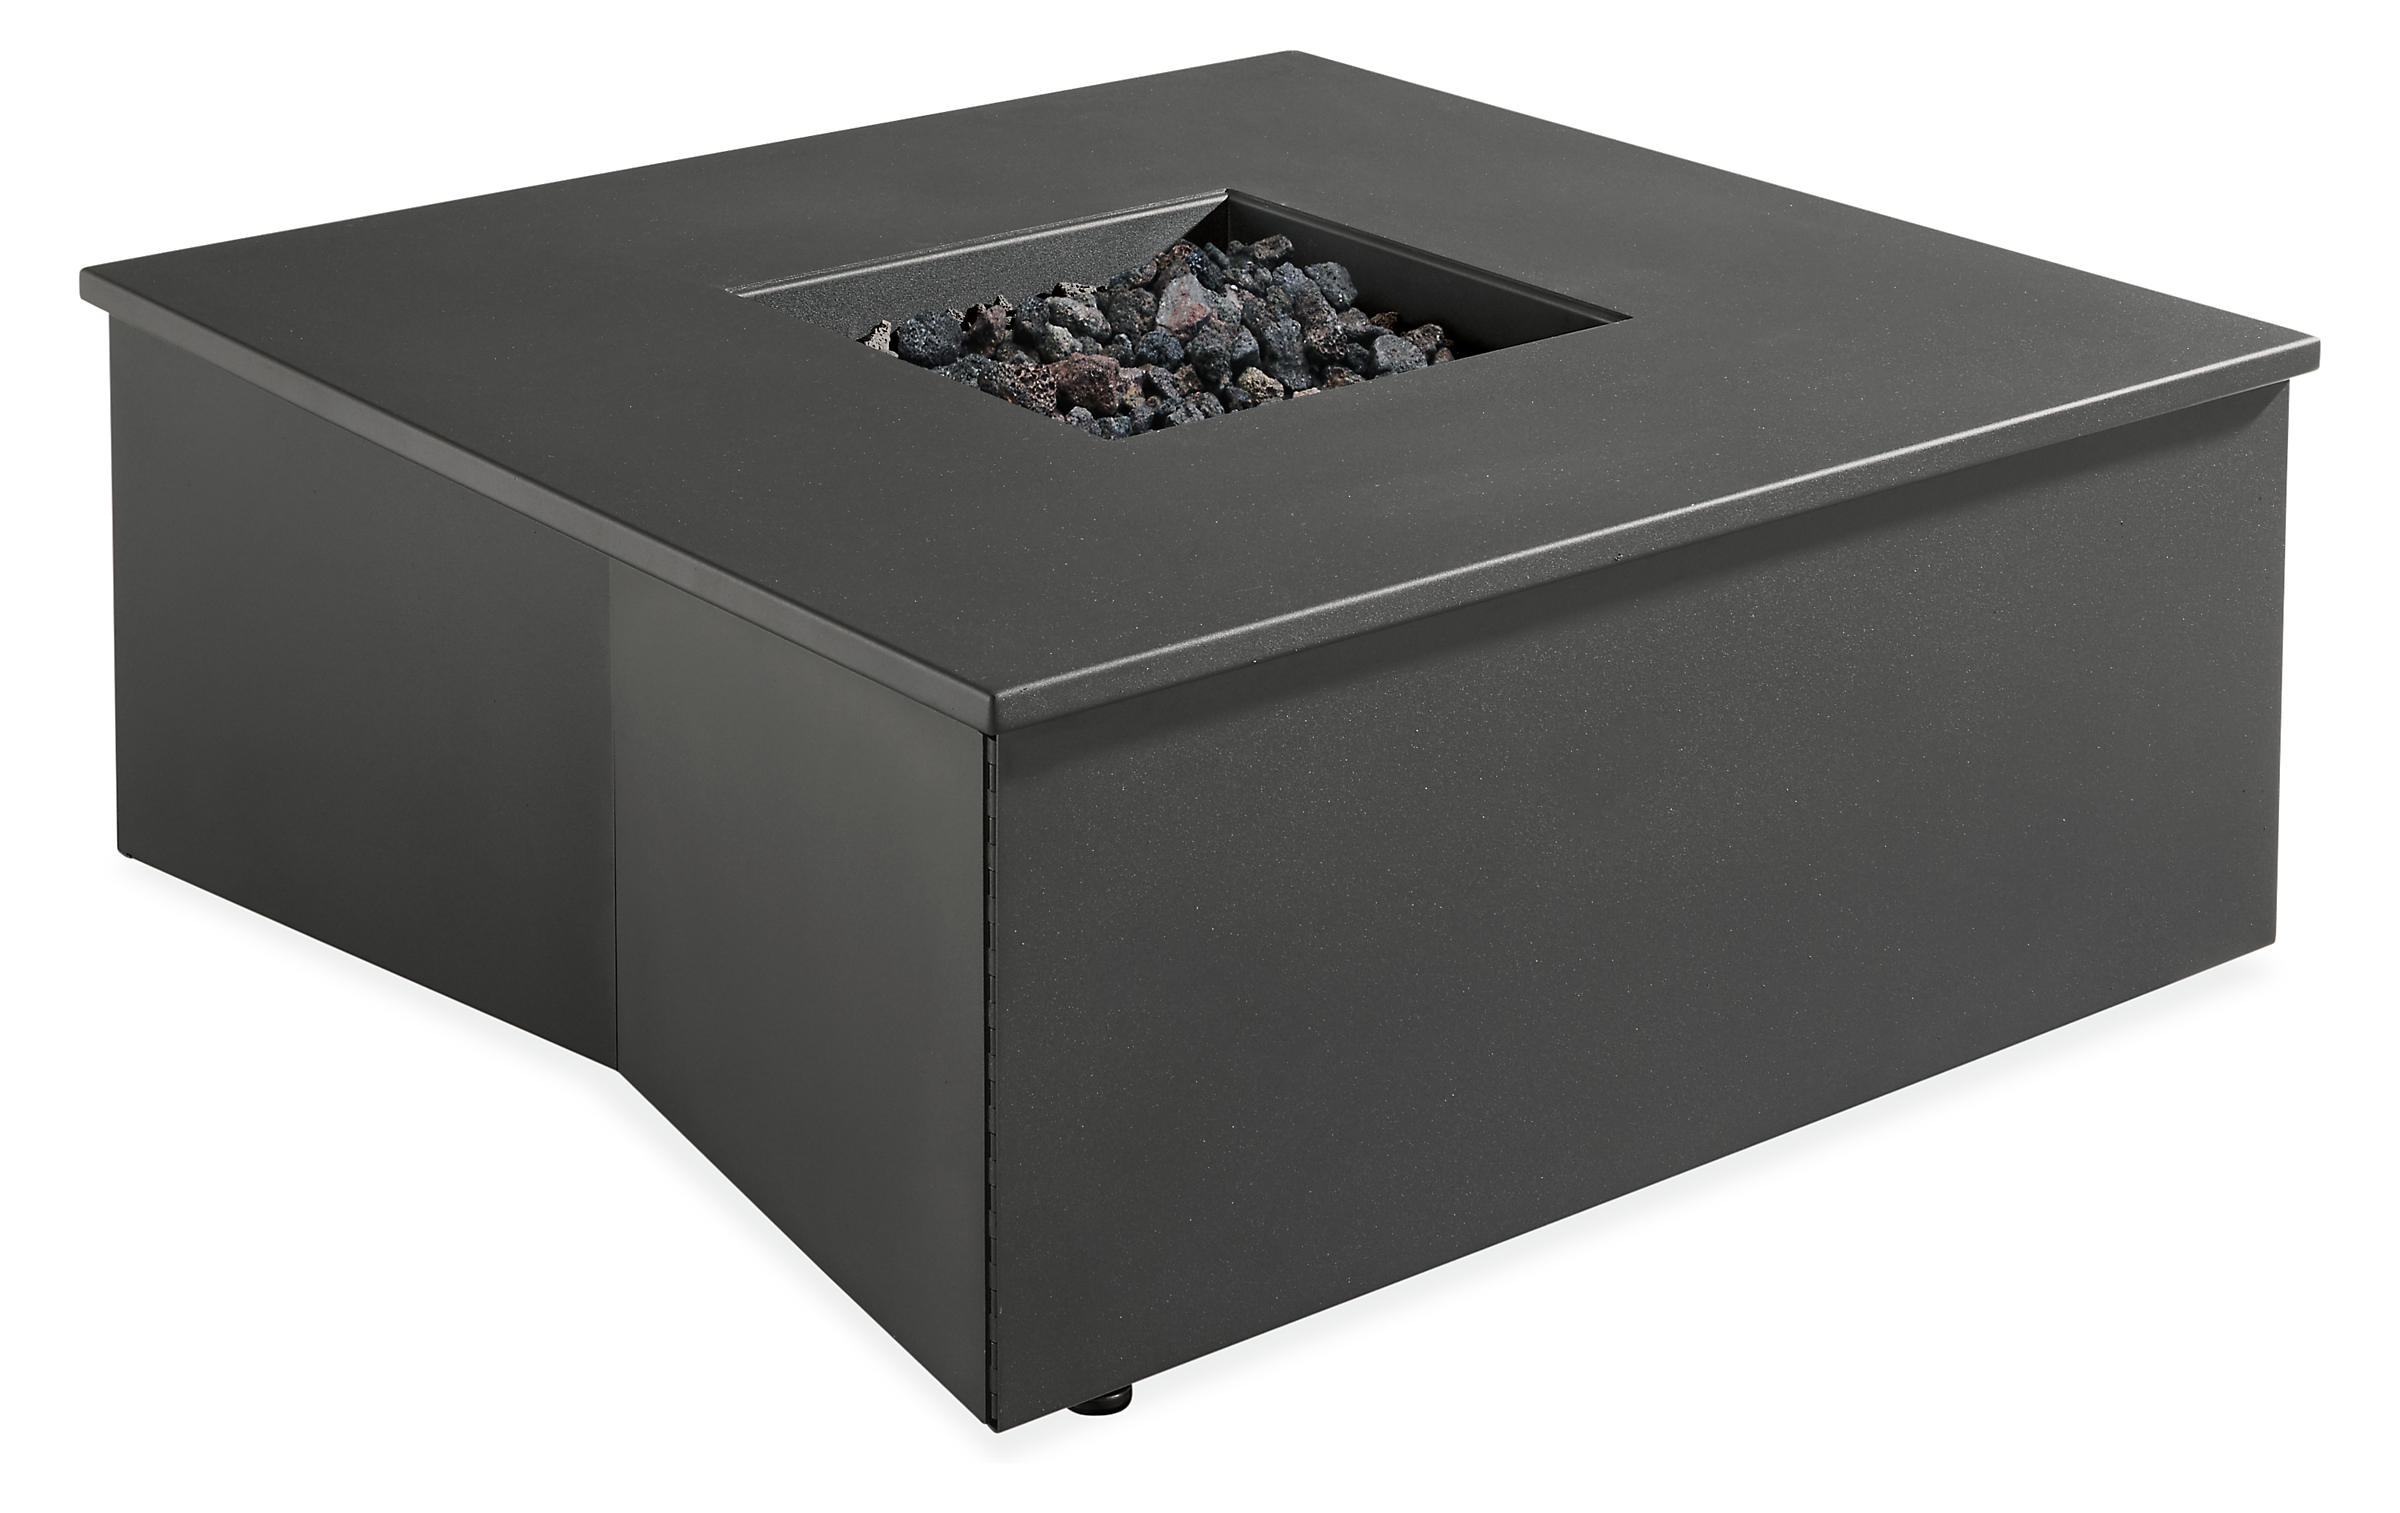 Adara 37w 37d 15h Outdoor Fire Table with Propane Tank in Graphite